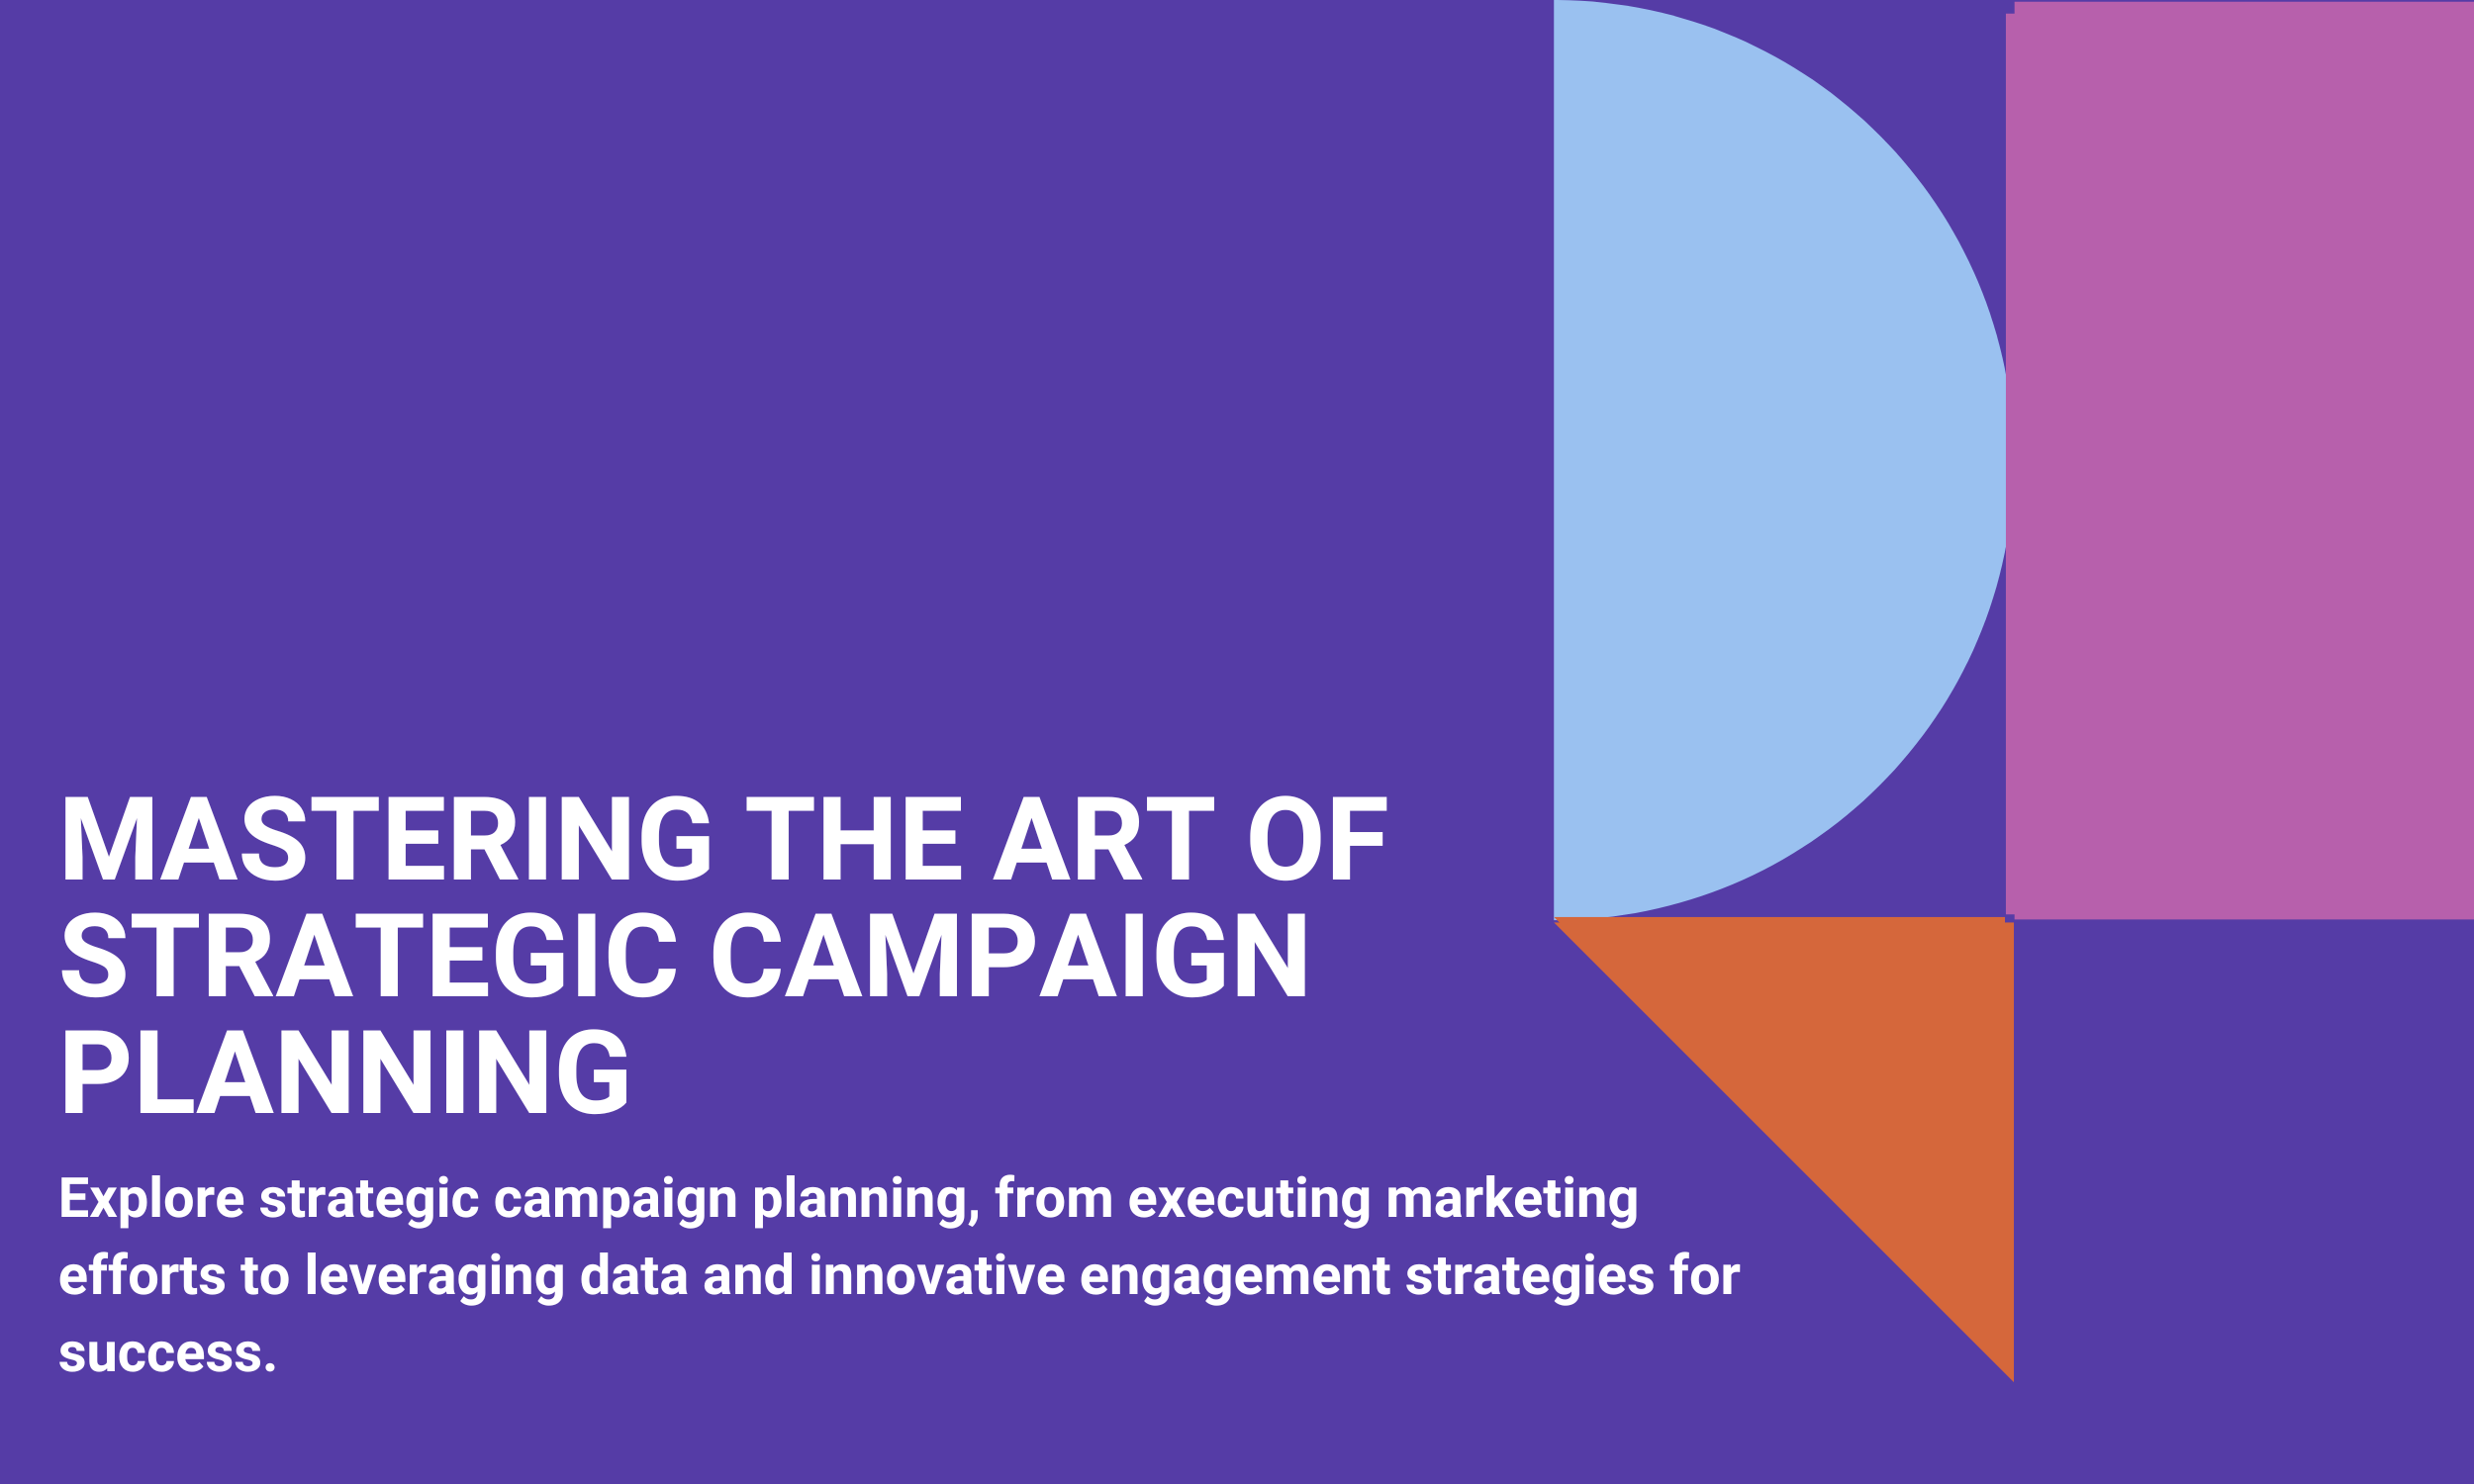 Explore strategic campaign planning, from executing marketing efforts to leveraging data and innovative engagement strategies for success.